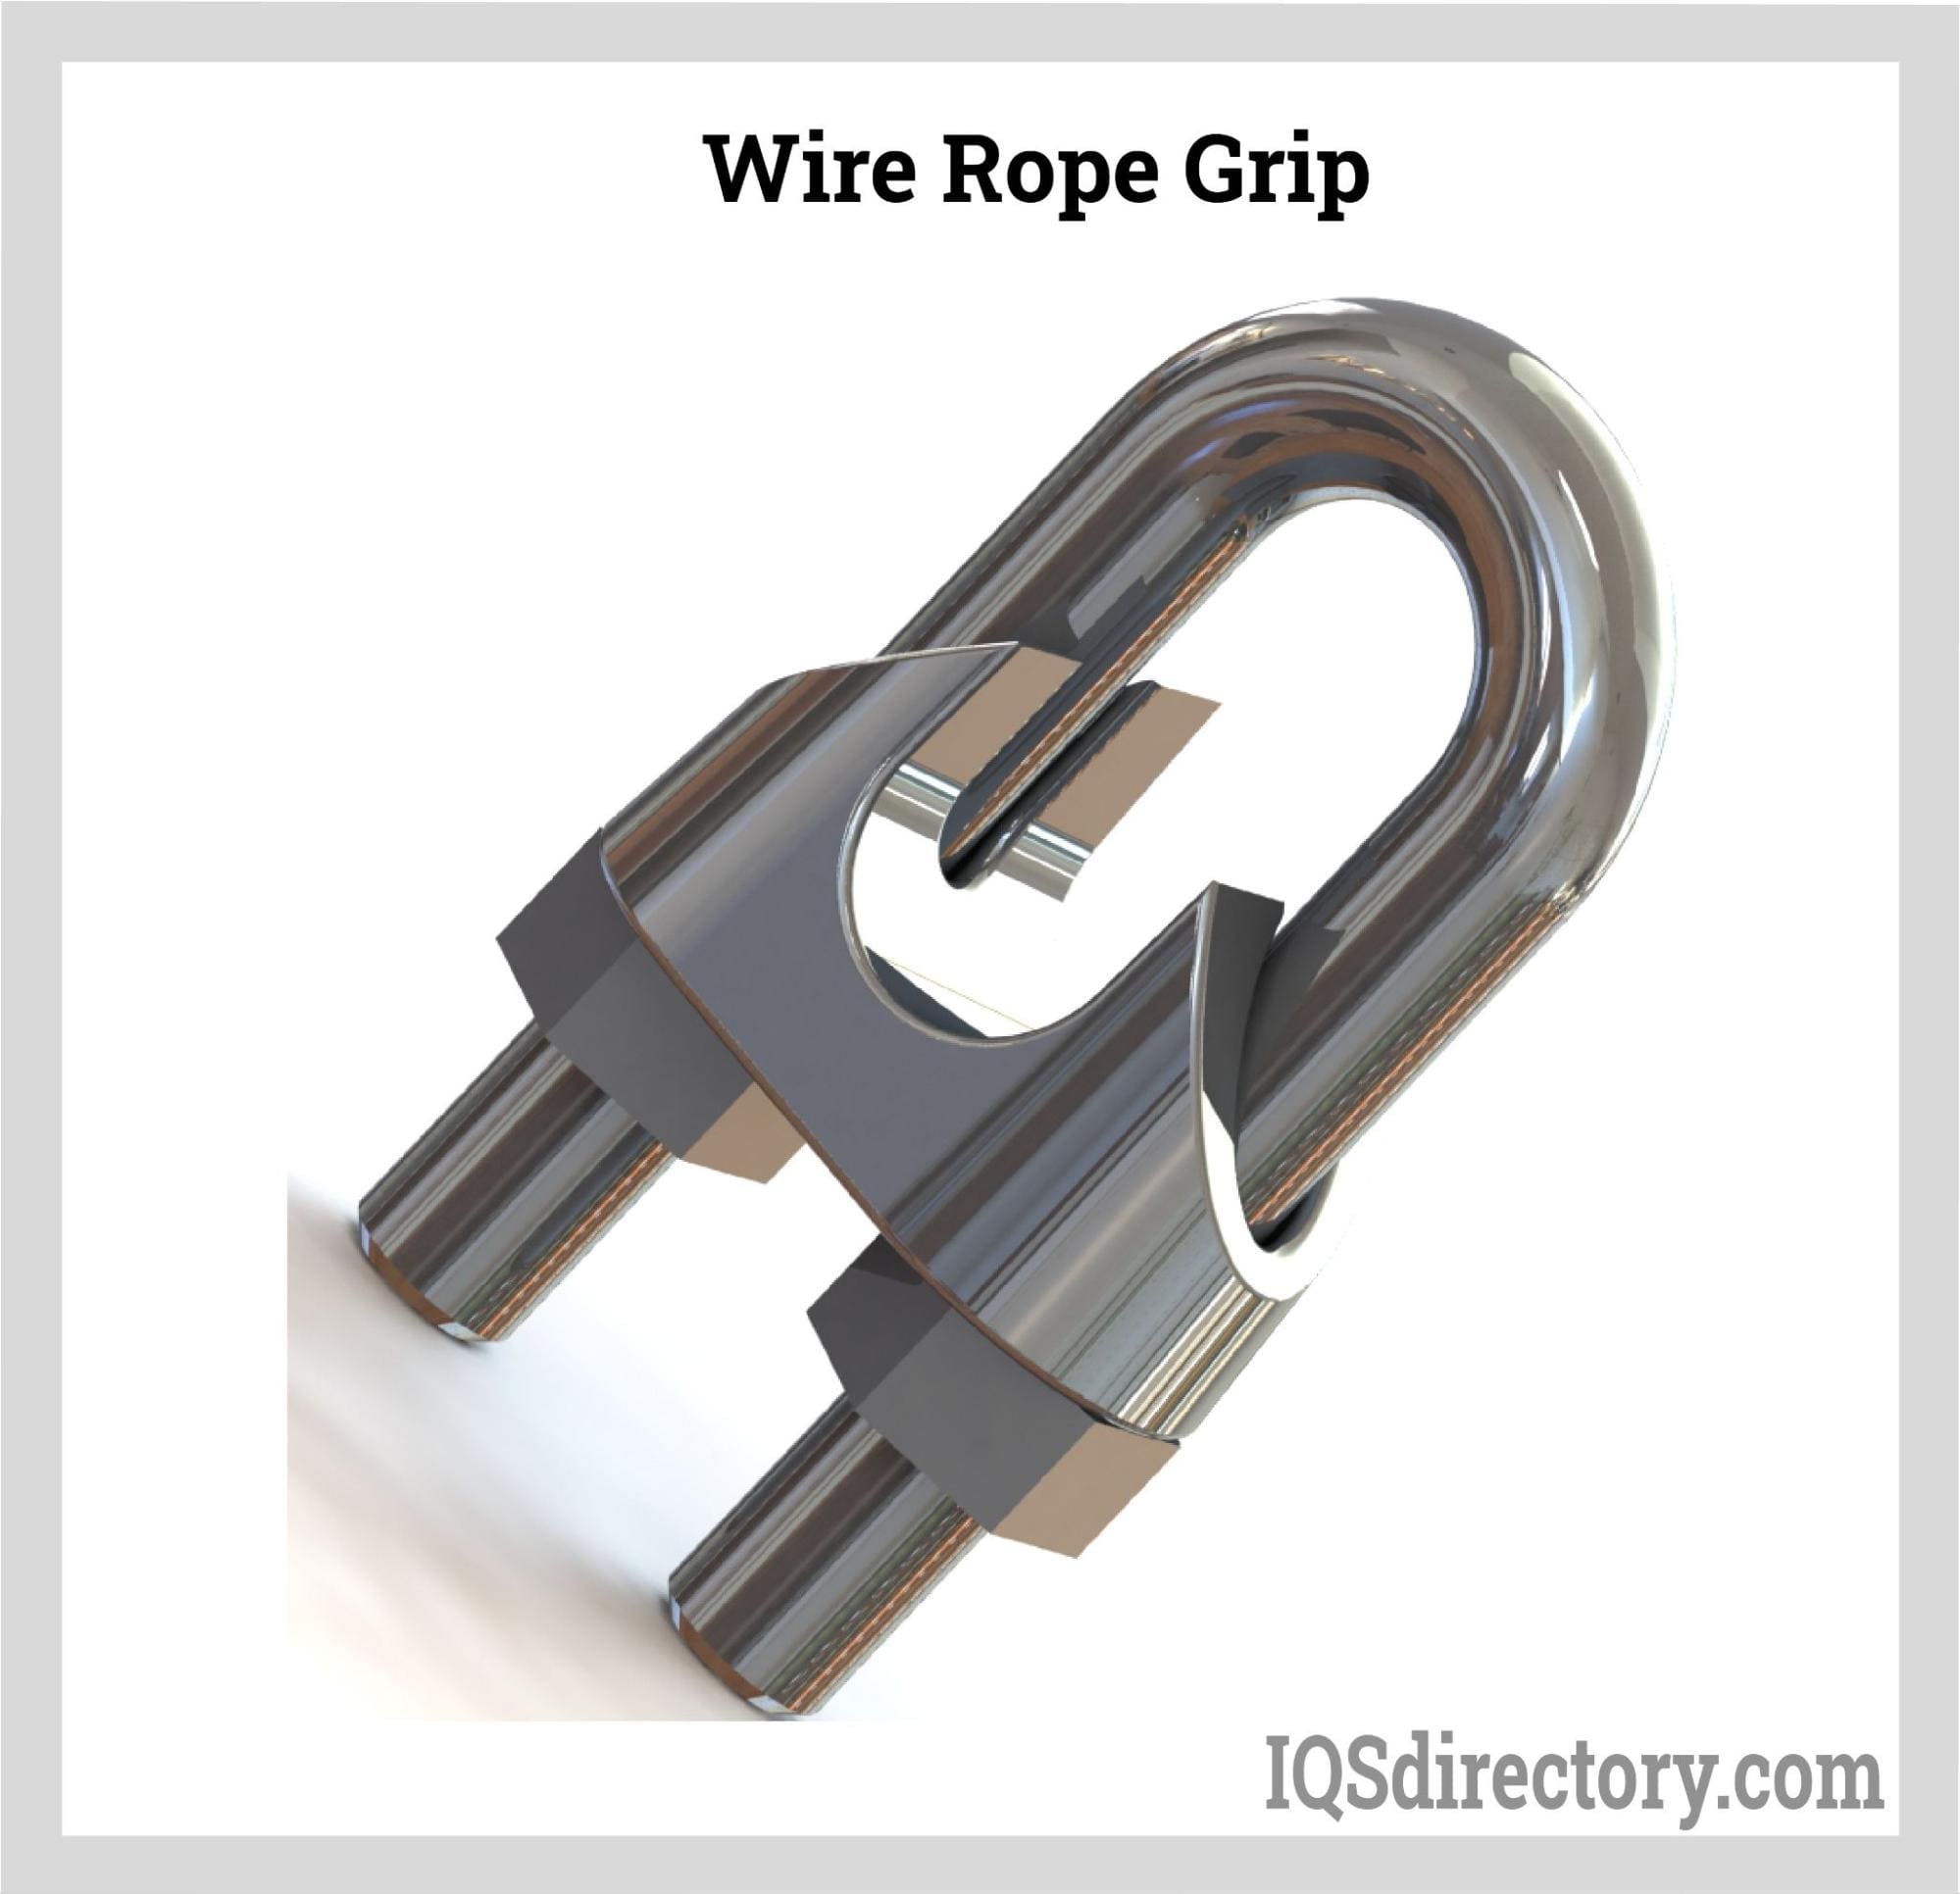 Wire Rope Assemblies: Types, Uses, Applications & Benefits